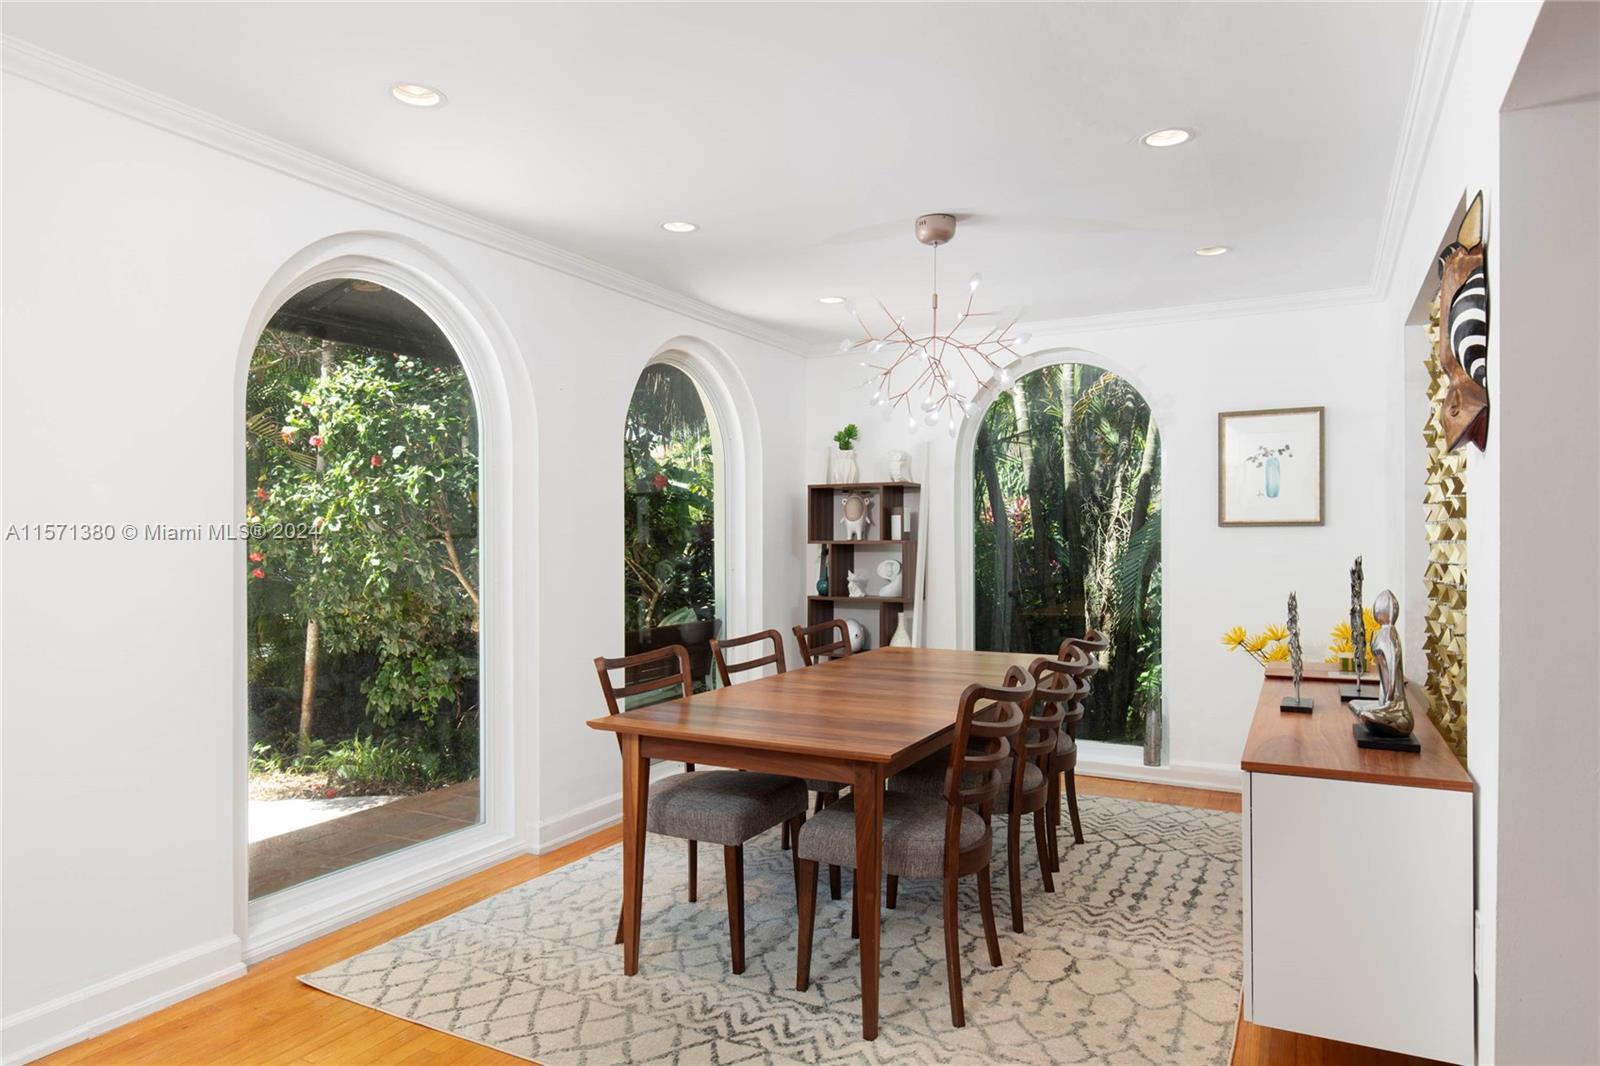 Fall in love with this ultra chic and charming villa in Coconut Grove’s most coveted community, the 